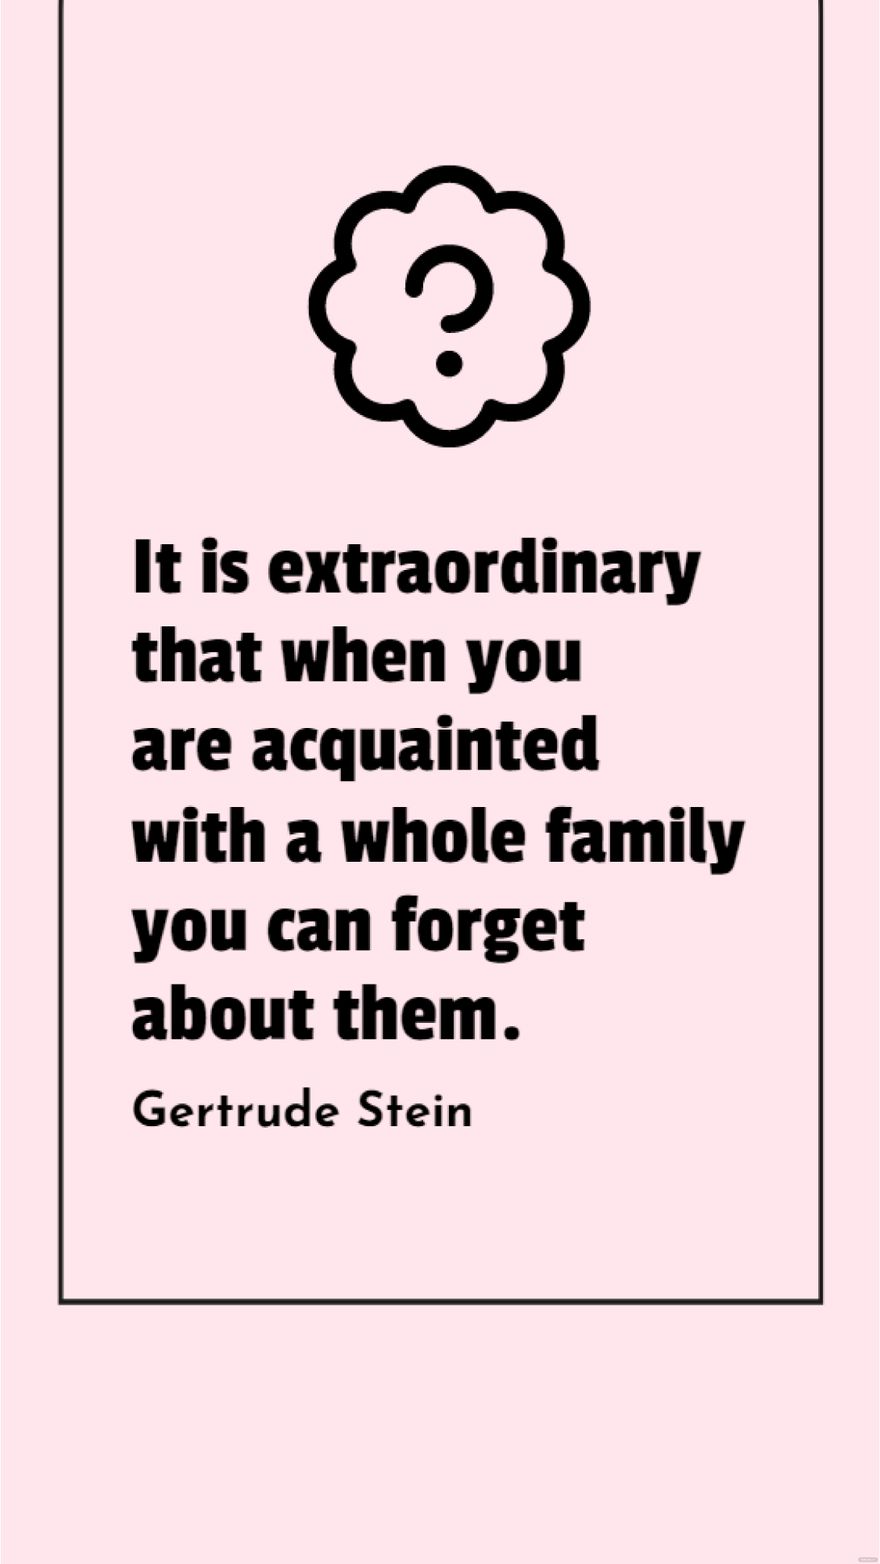 Gertrude Stein - It is extraordinary that when you are acquainted with a whole family you can forget about them.